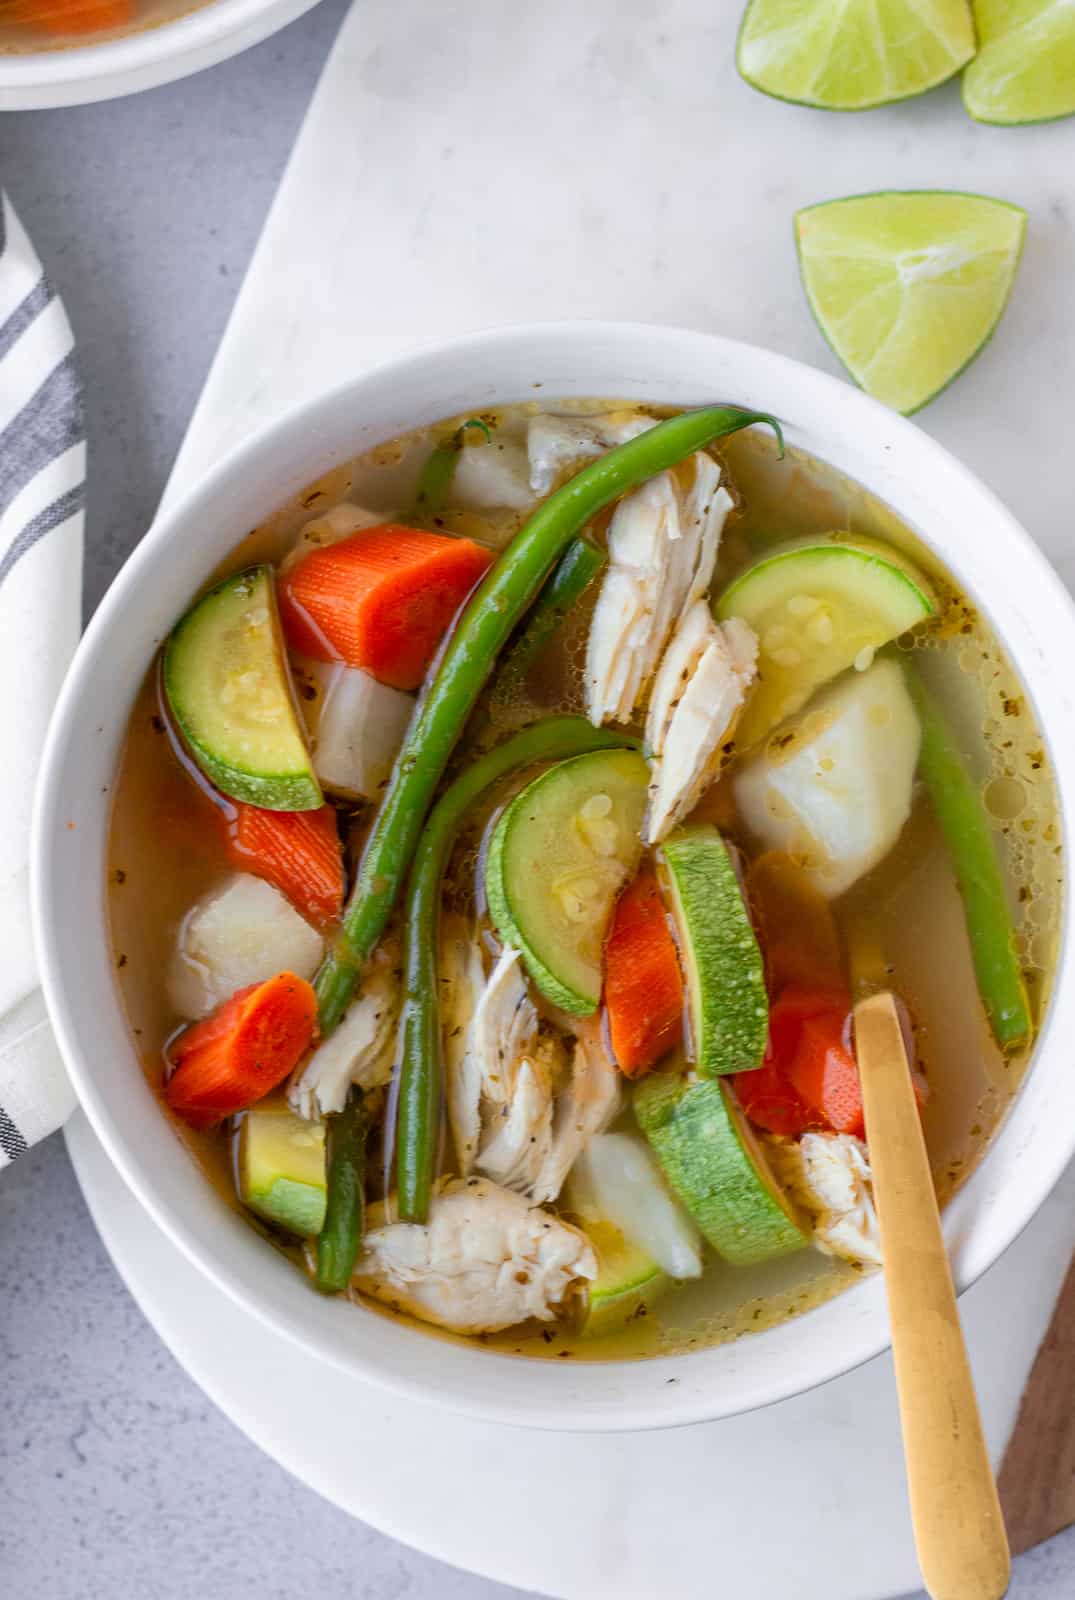 Overhead view of caldo de pollo in a white bowl with lime wedges on the side.